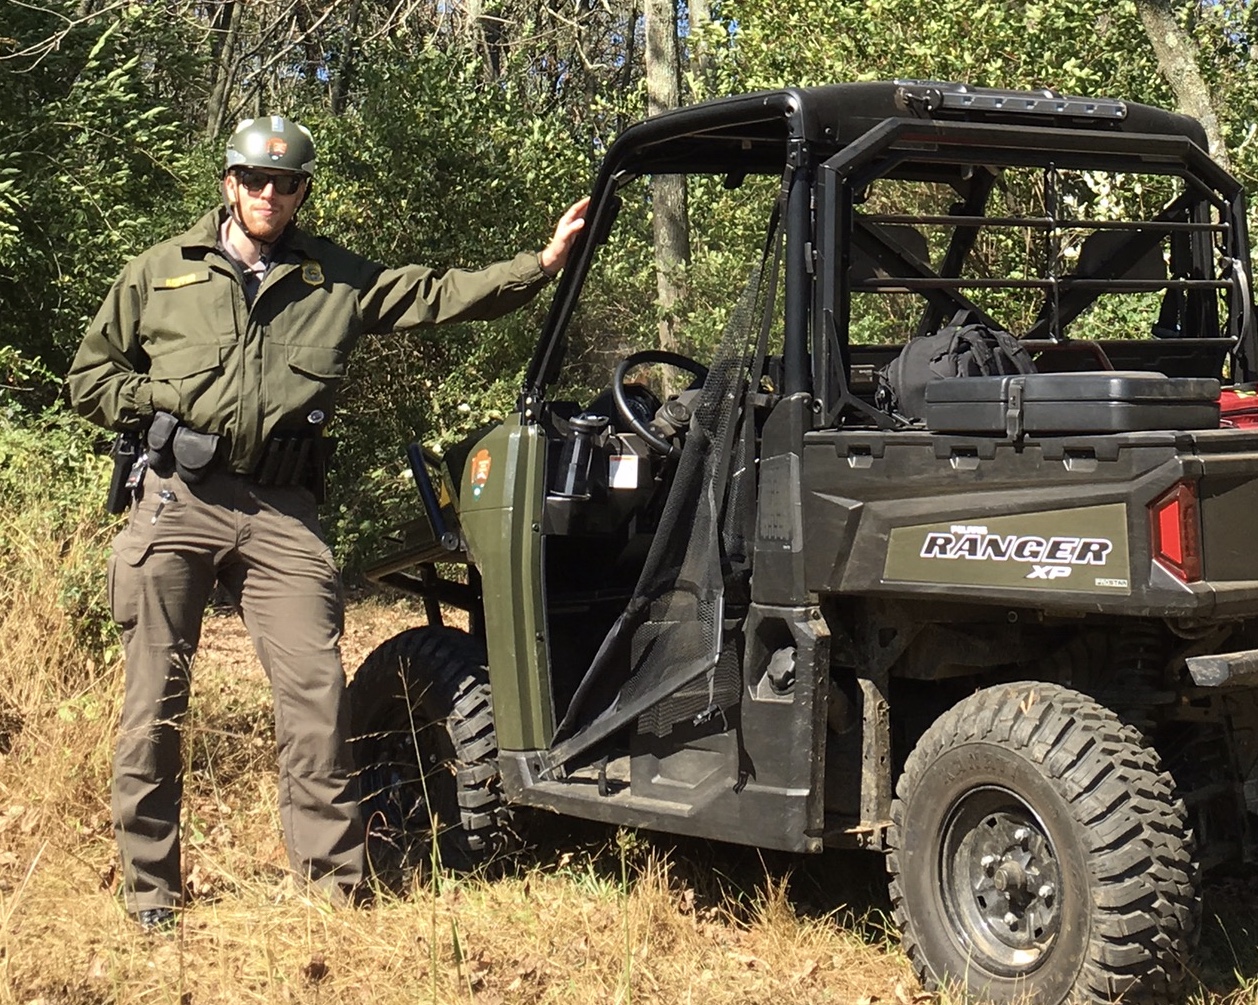 Law Enforcement Ranger leans on an ATV in the woods